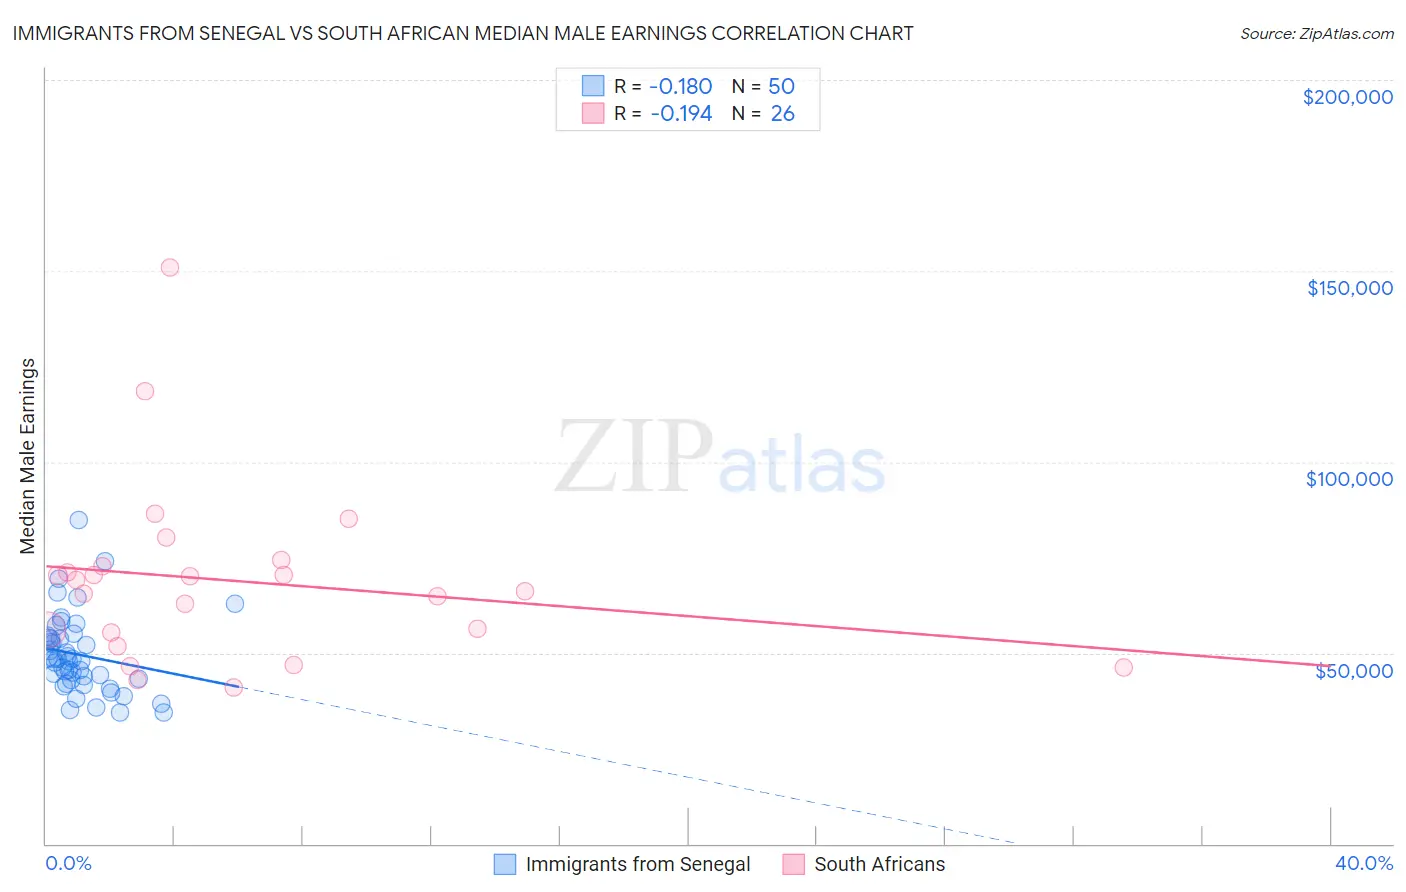 Immigrants from Senegal vs South African Median Male Earnings